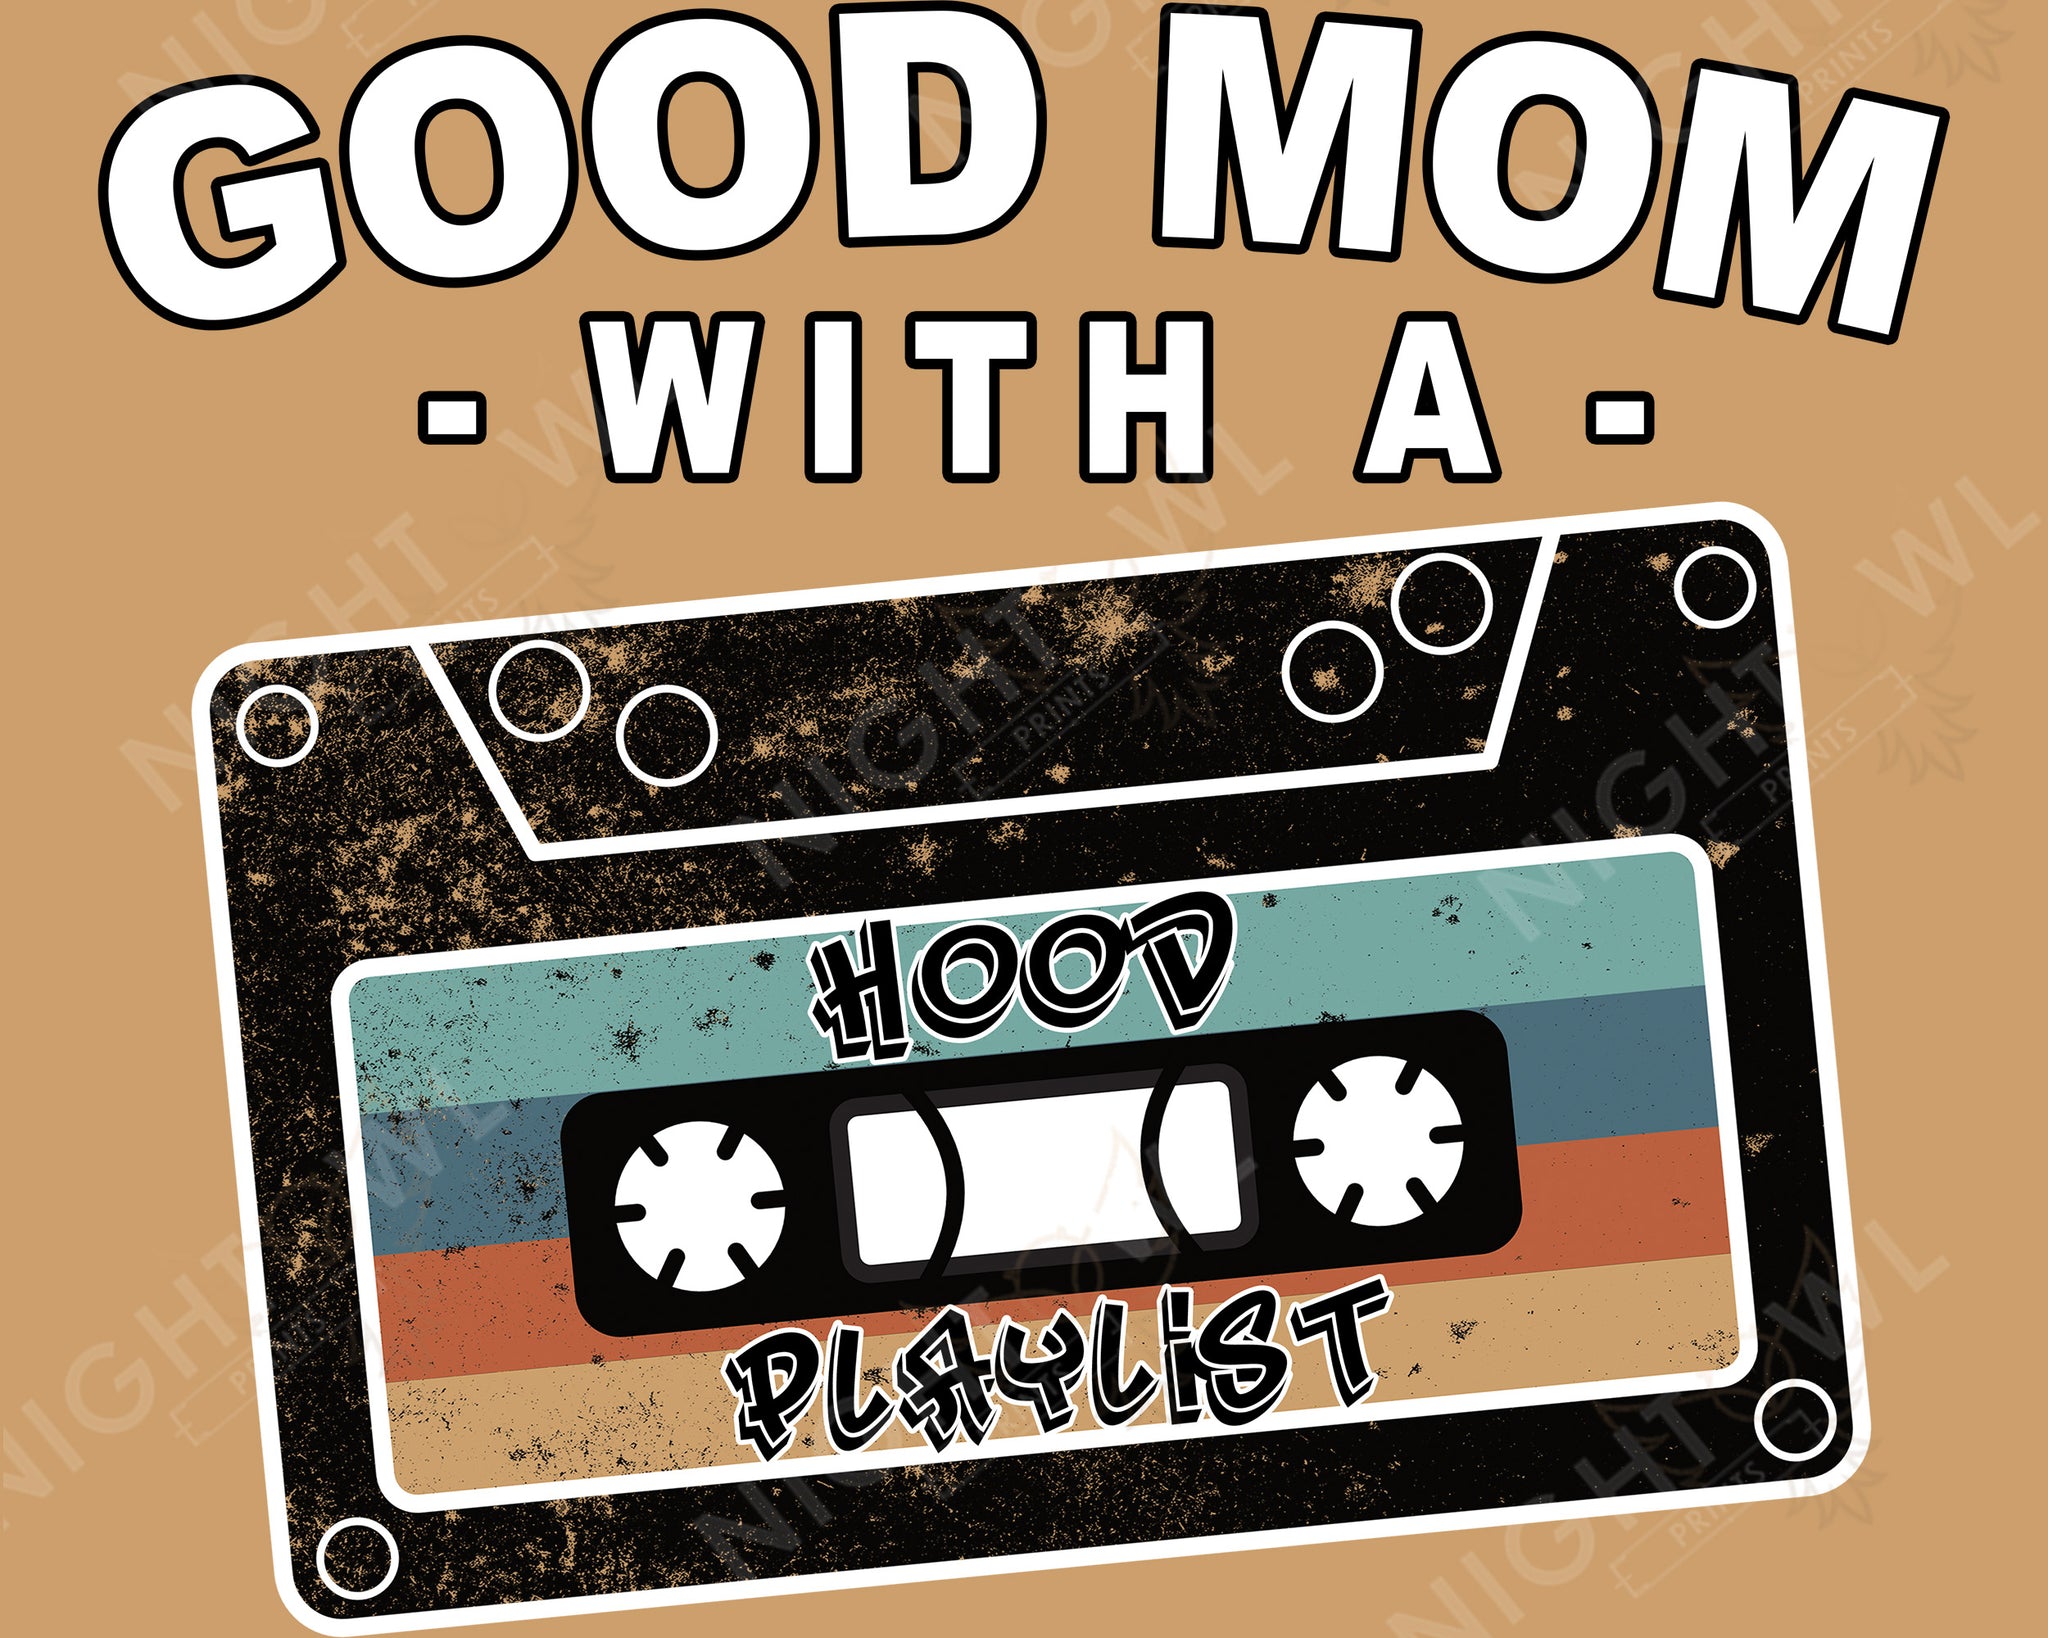 Download file PNG. Good Mom with a Hood Playlist. 300 DPI.  Print ready file.